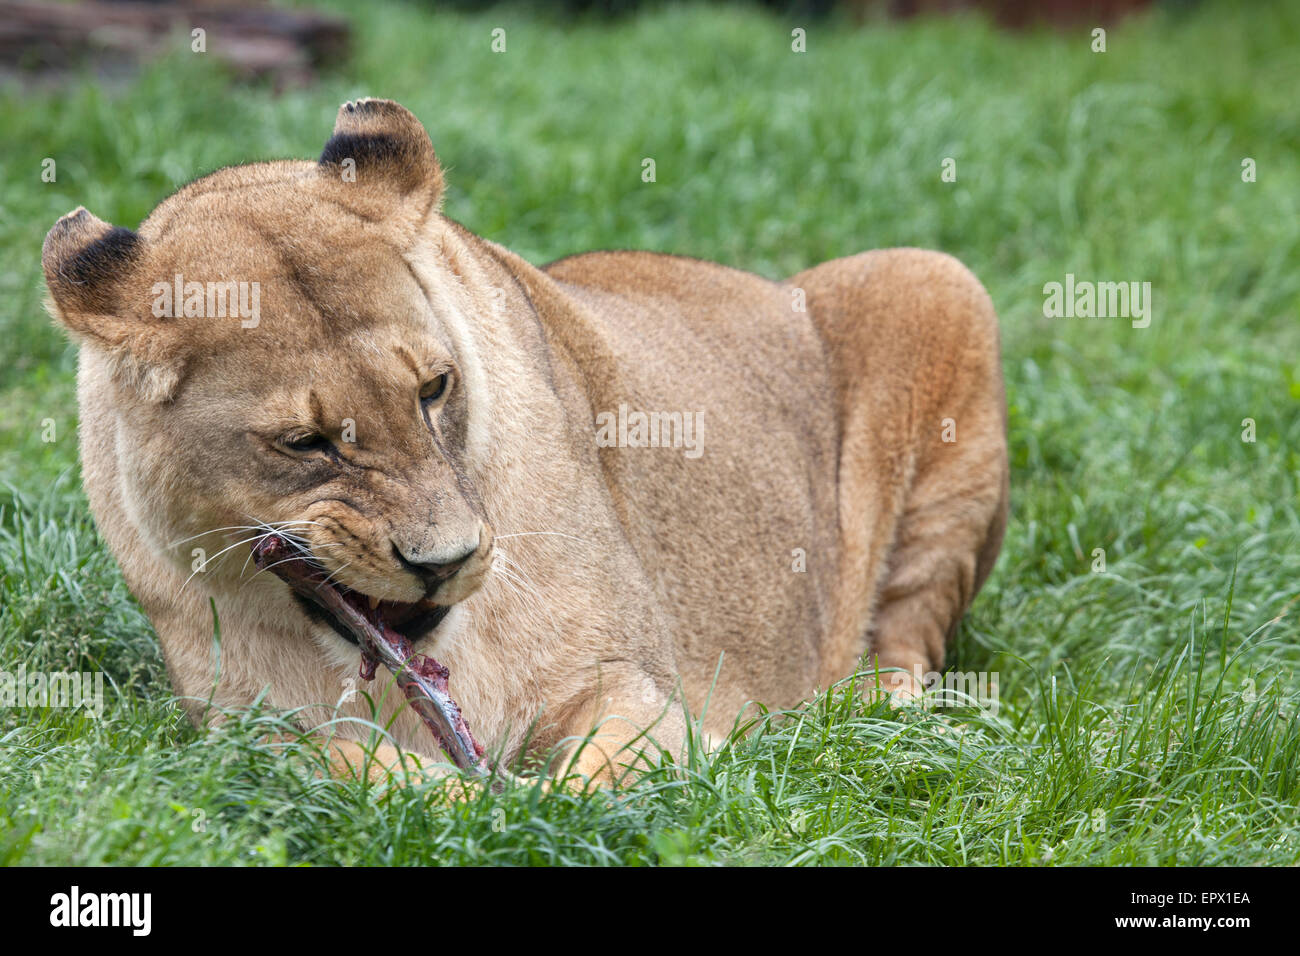 A landscape view of an African Lioness eating meal Stock Photo